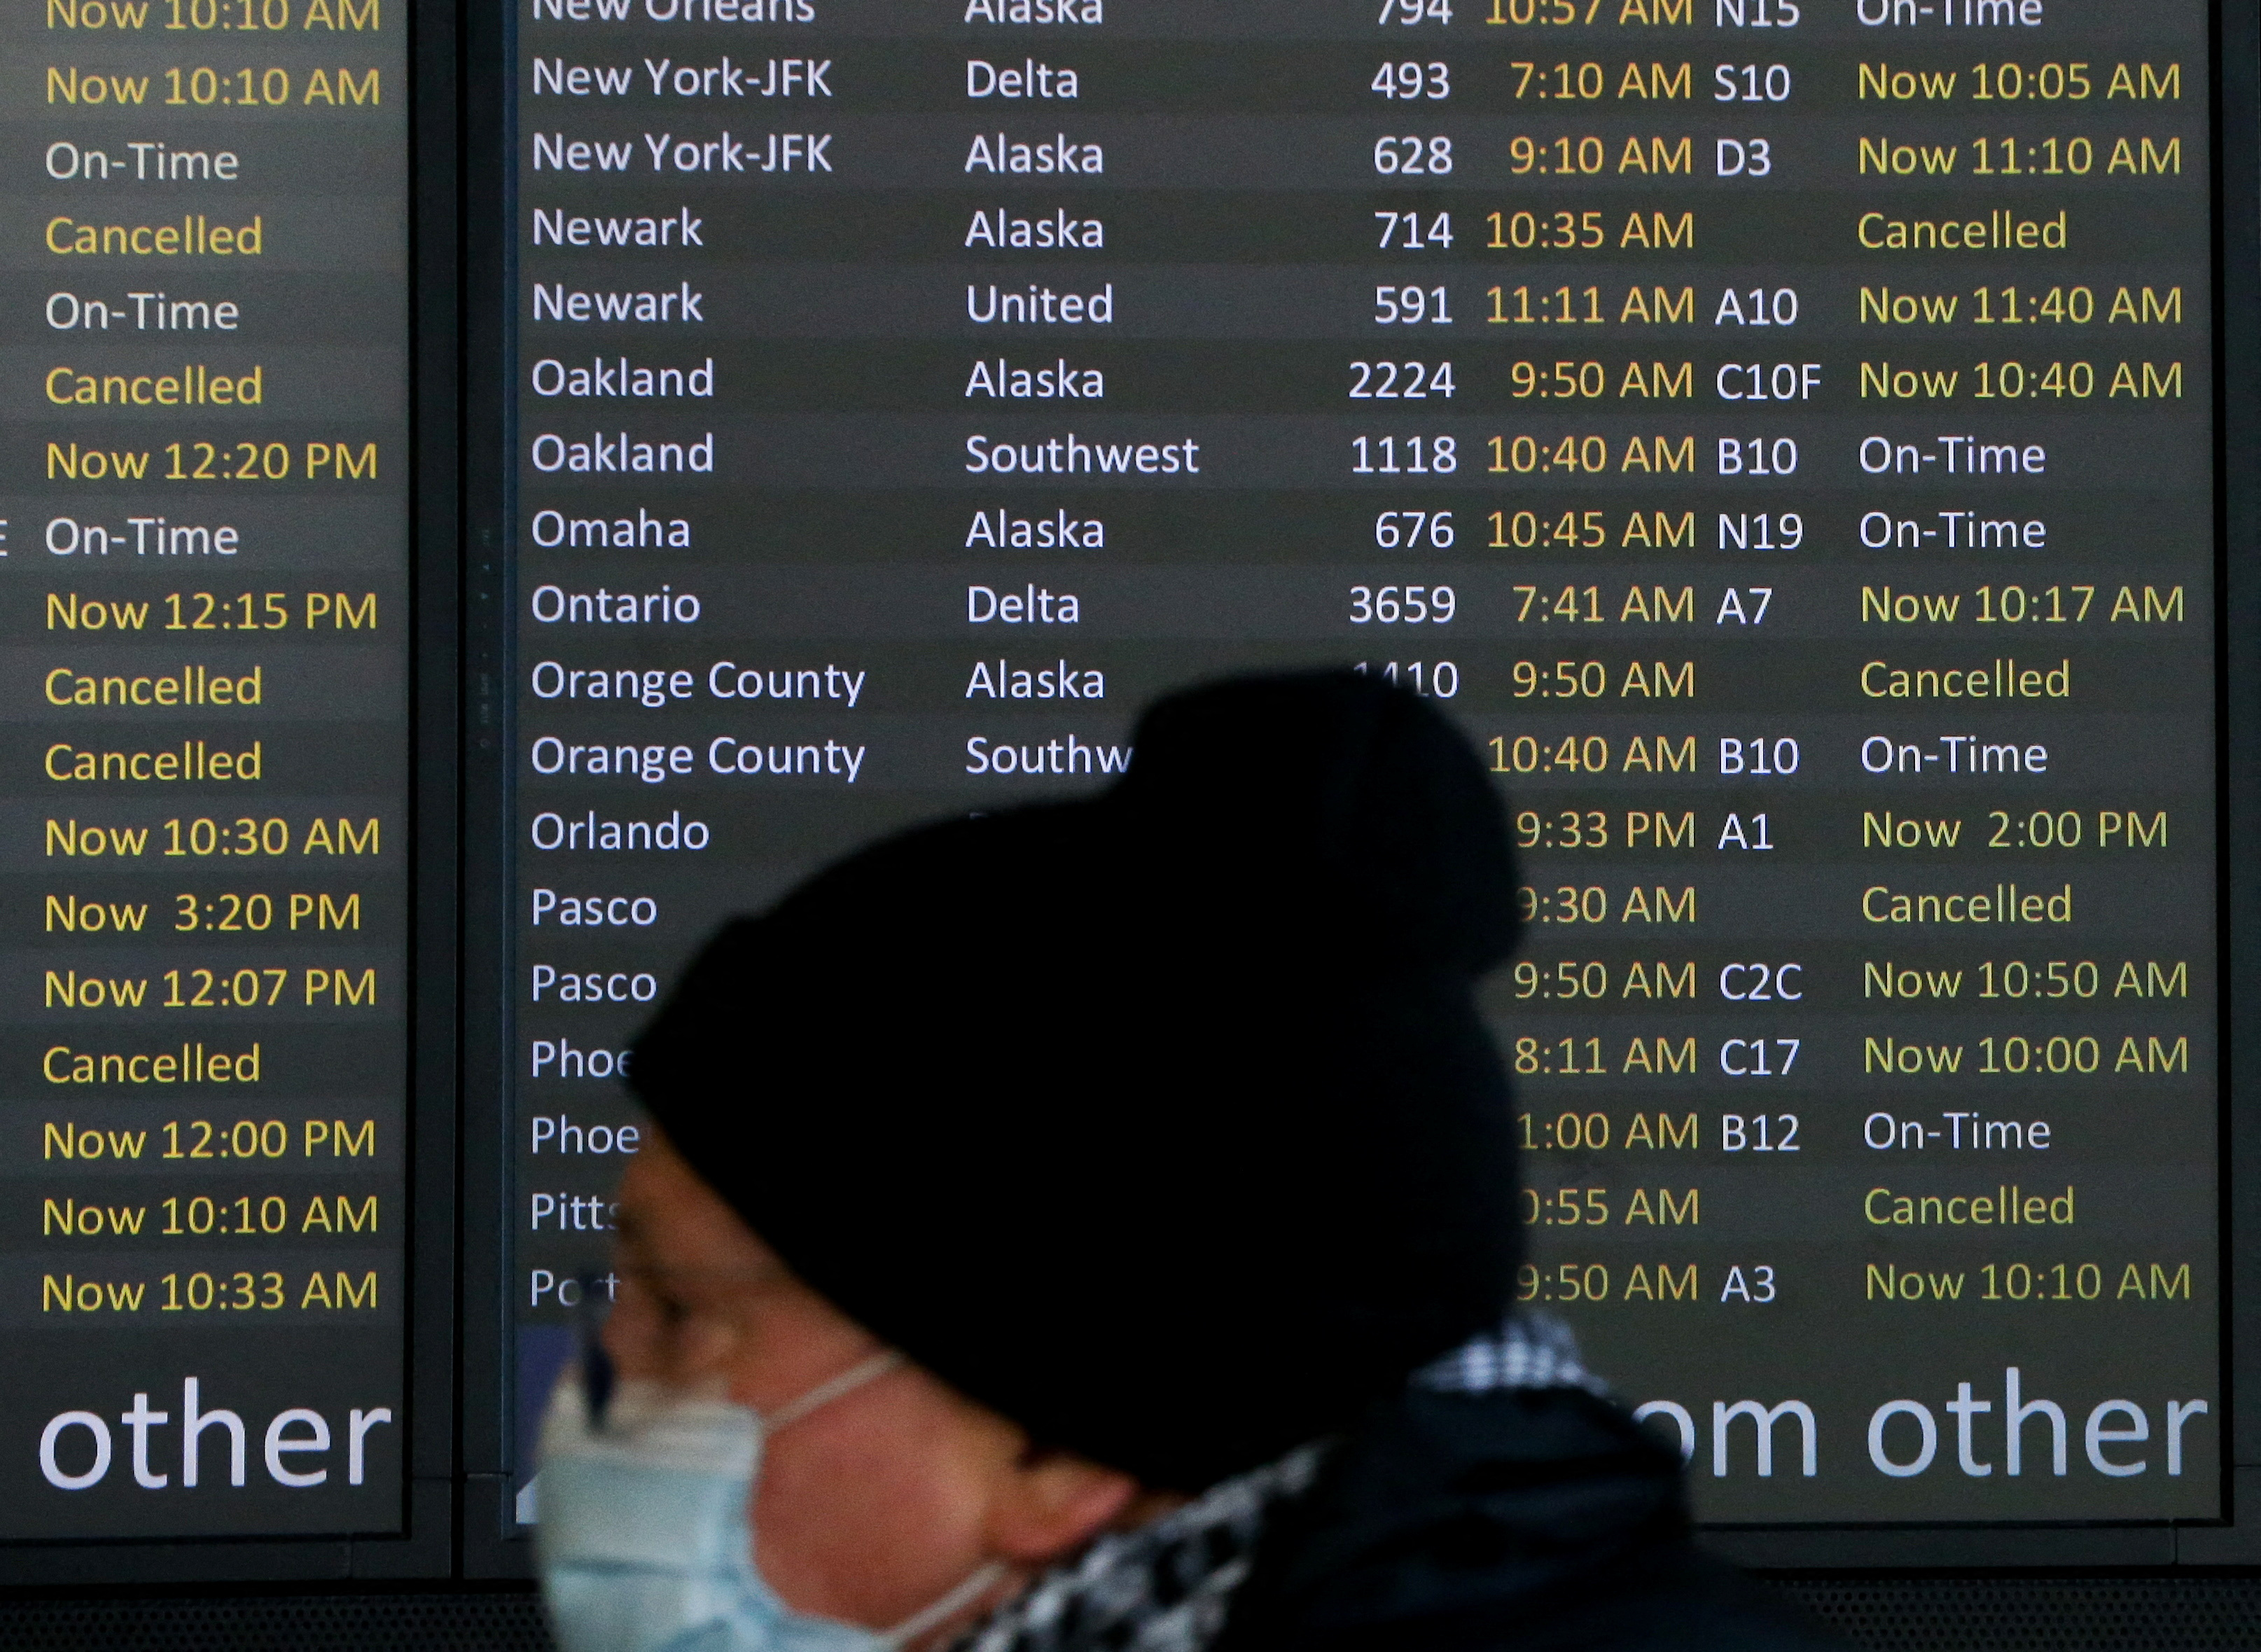 Dozens of flights listed as cancelled or delayed at Seattle-Tacoma International Airport